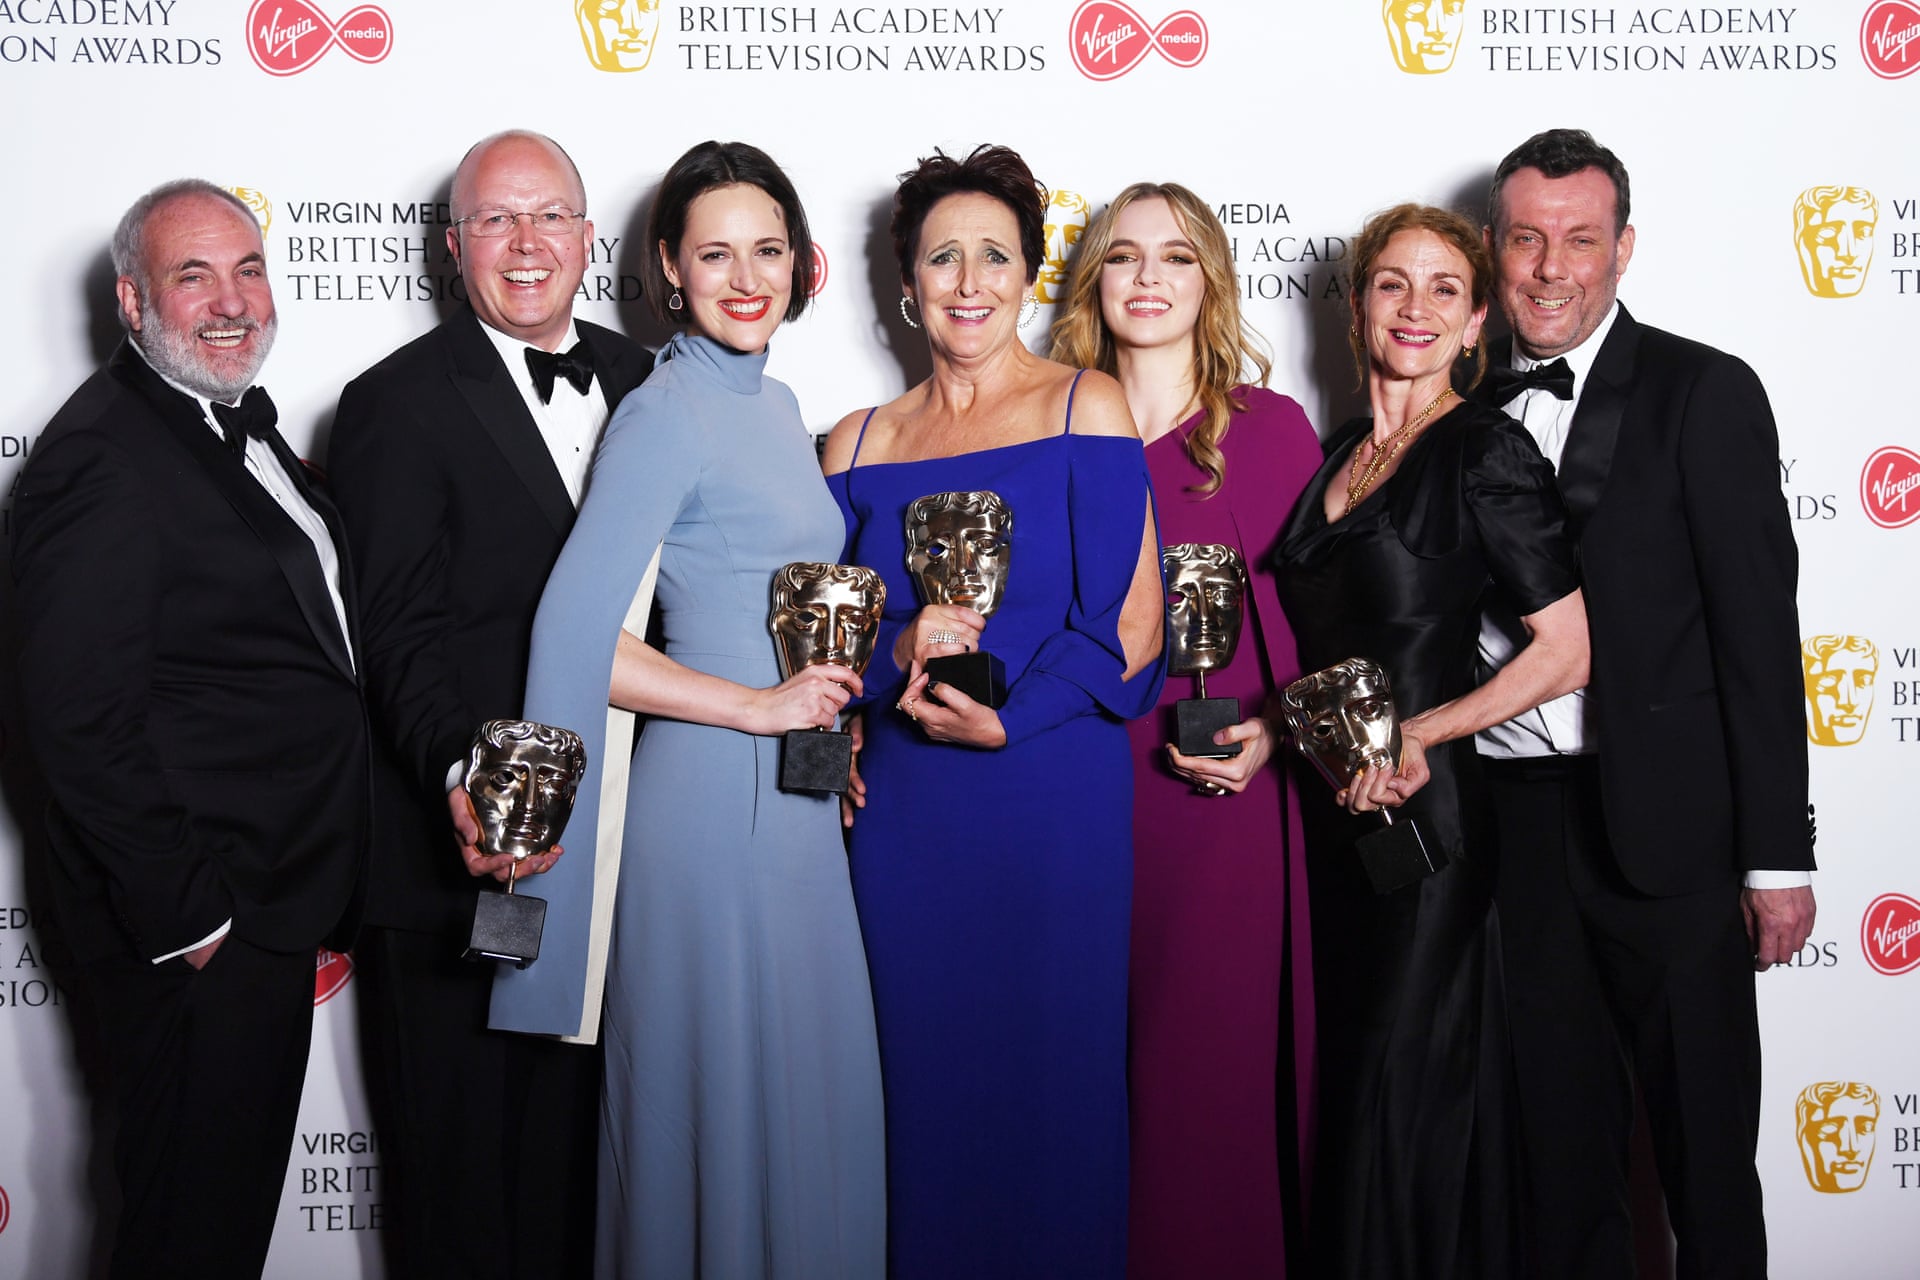 The Best BAFTA Television Awards Looks Red Carpet And Winners